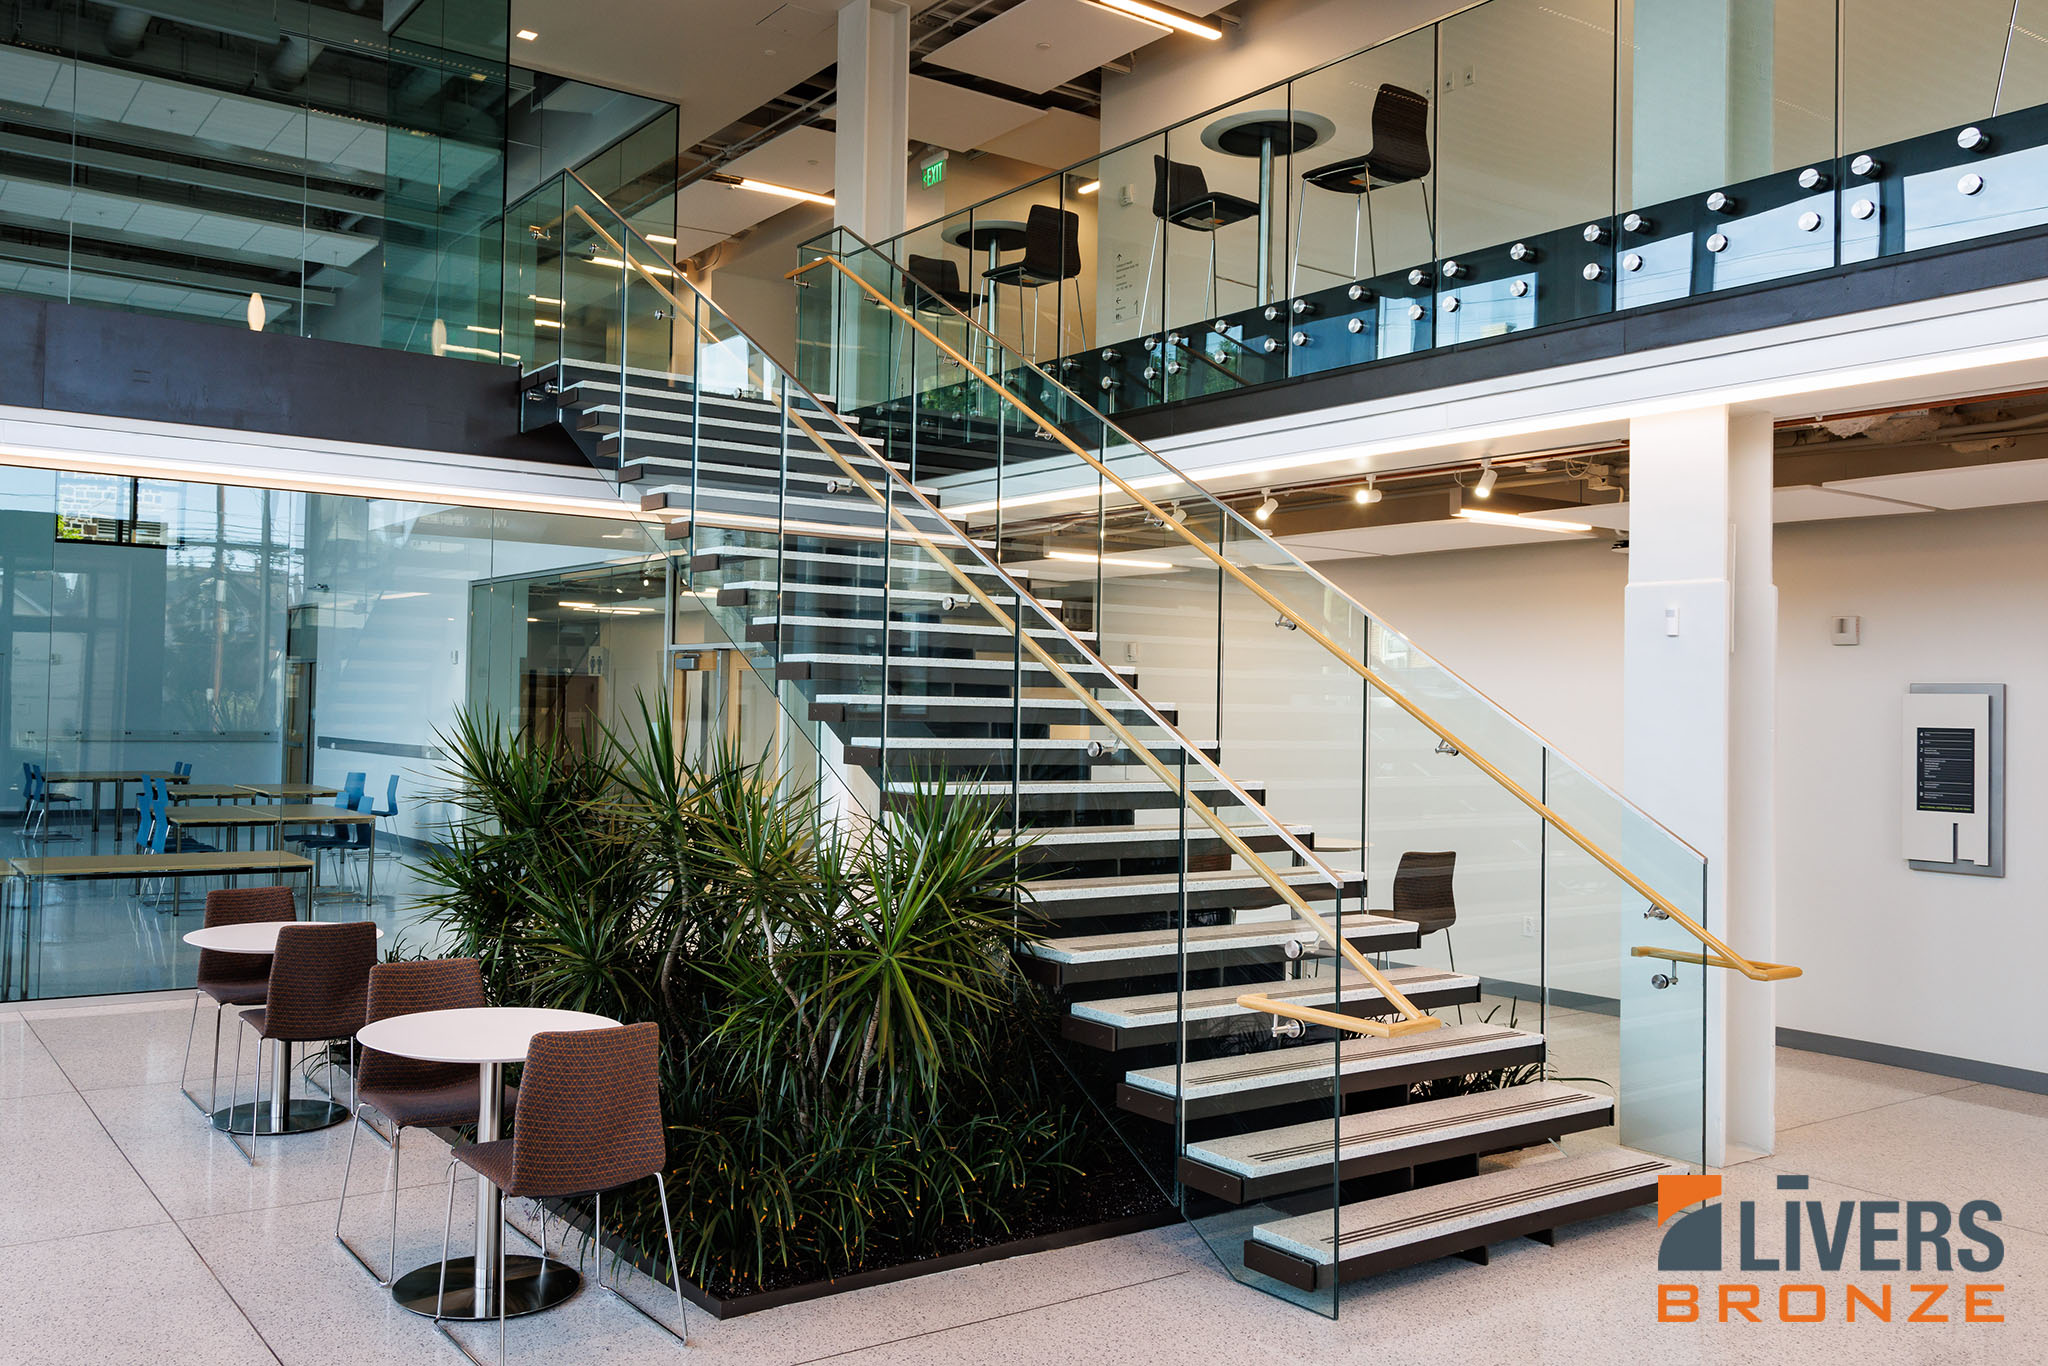 Livers Bronze Button Glass Railing System was installed at the lobby stairway at Lehigh University's Health, Science & Technology Building and is Made in the USA.